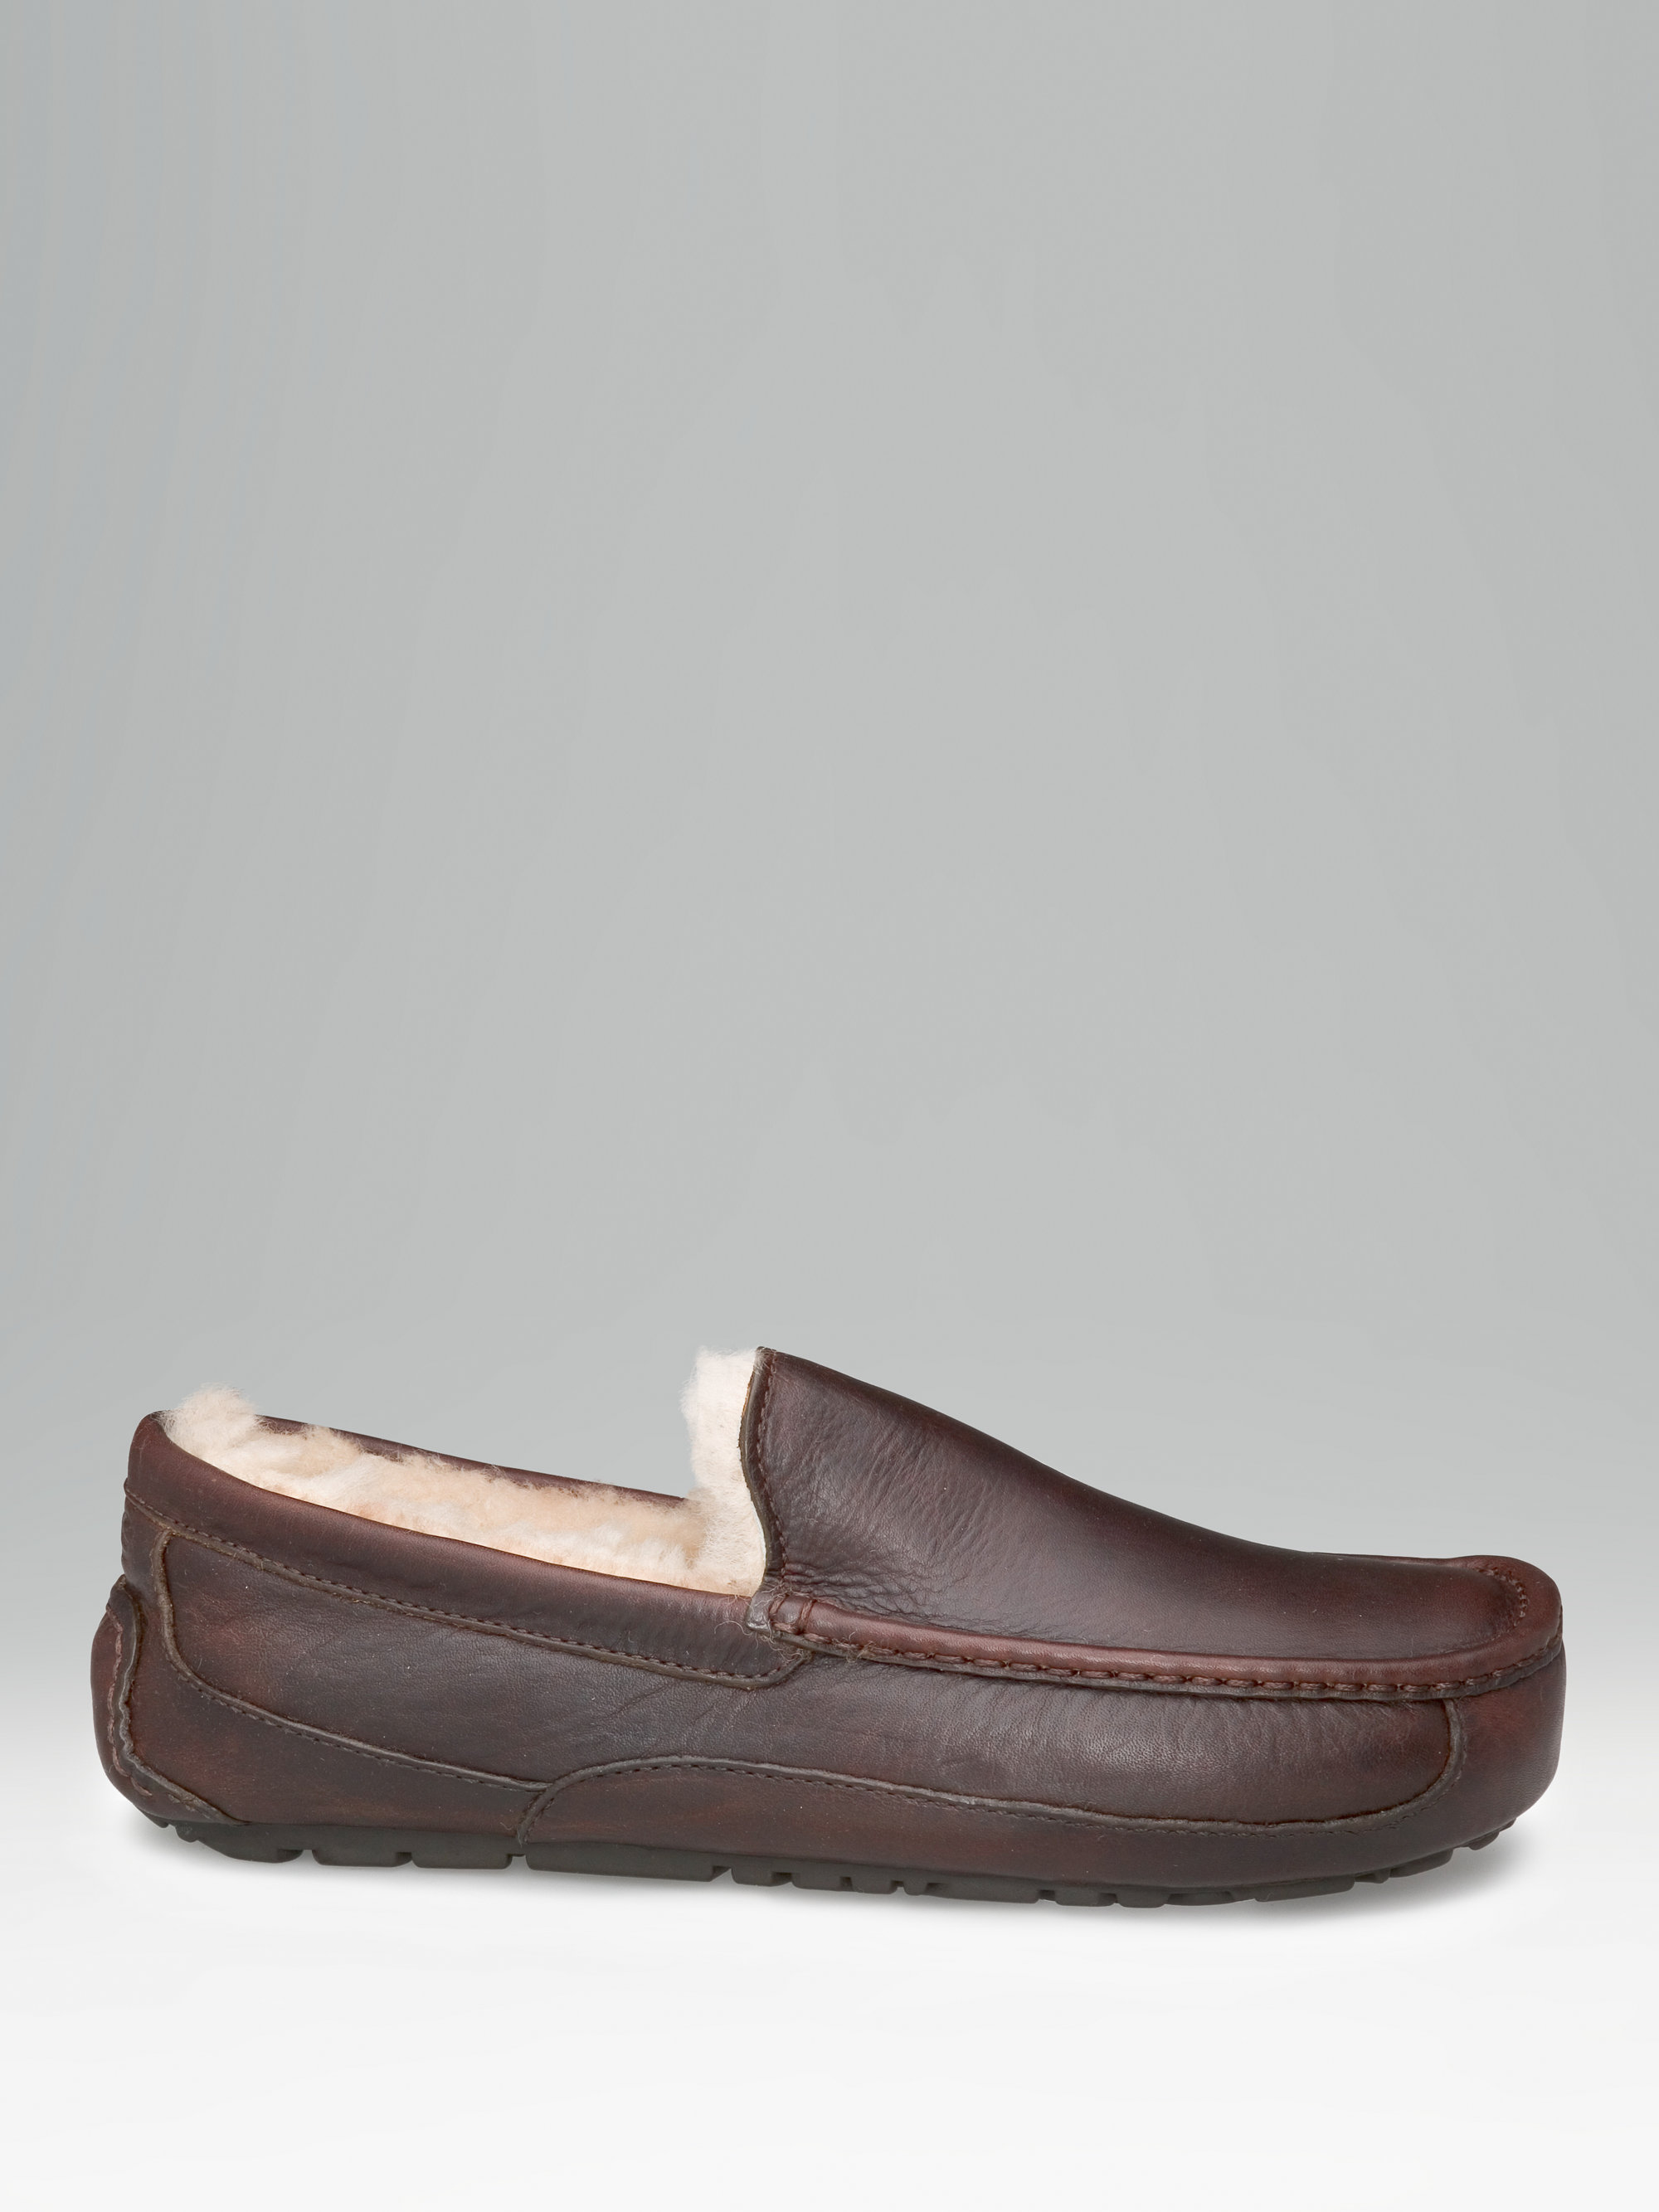 ugg leather slippers womens